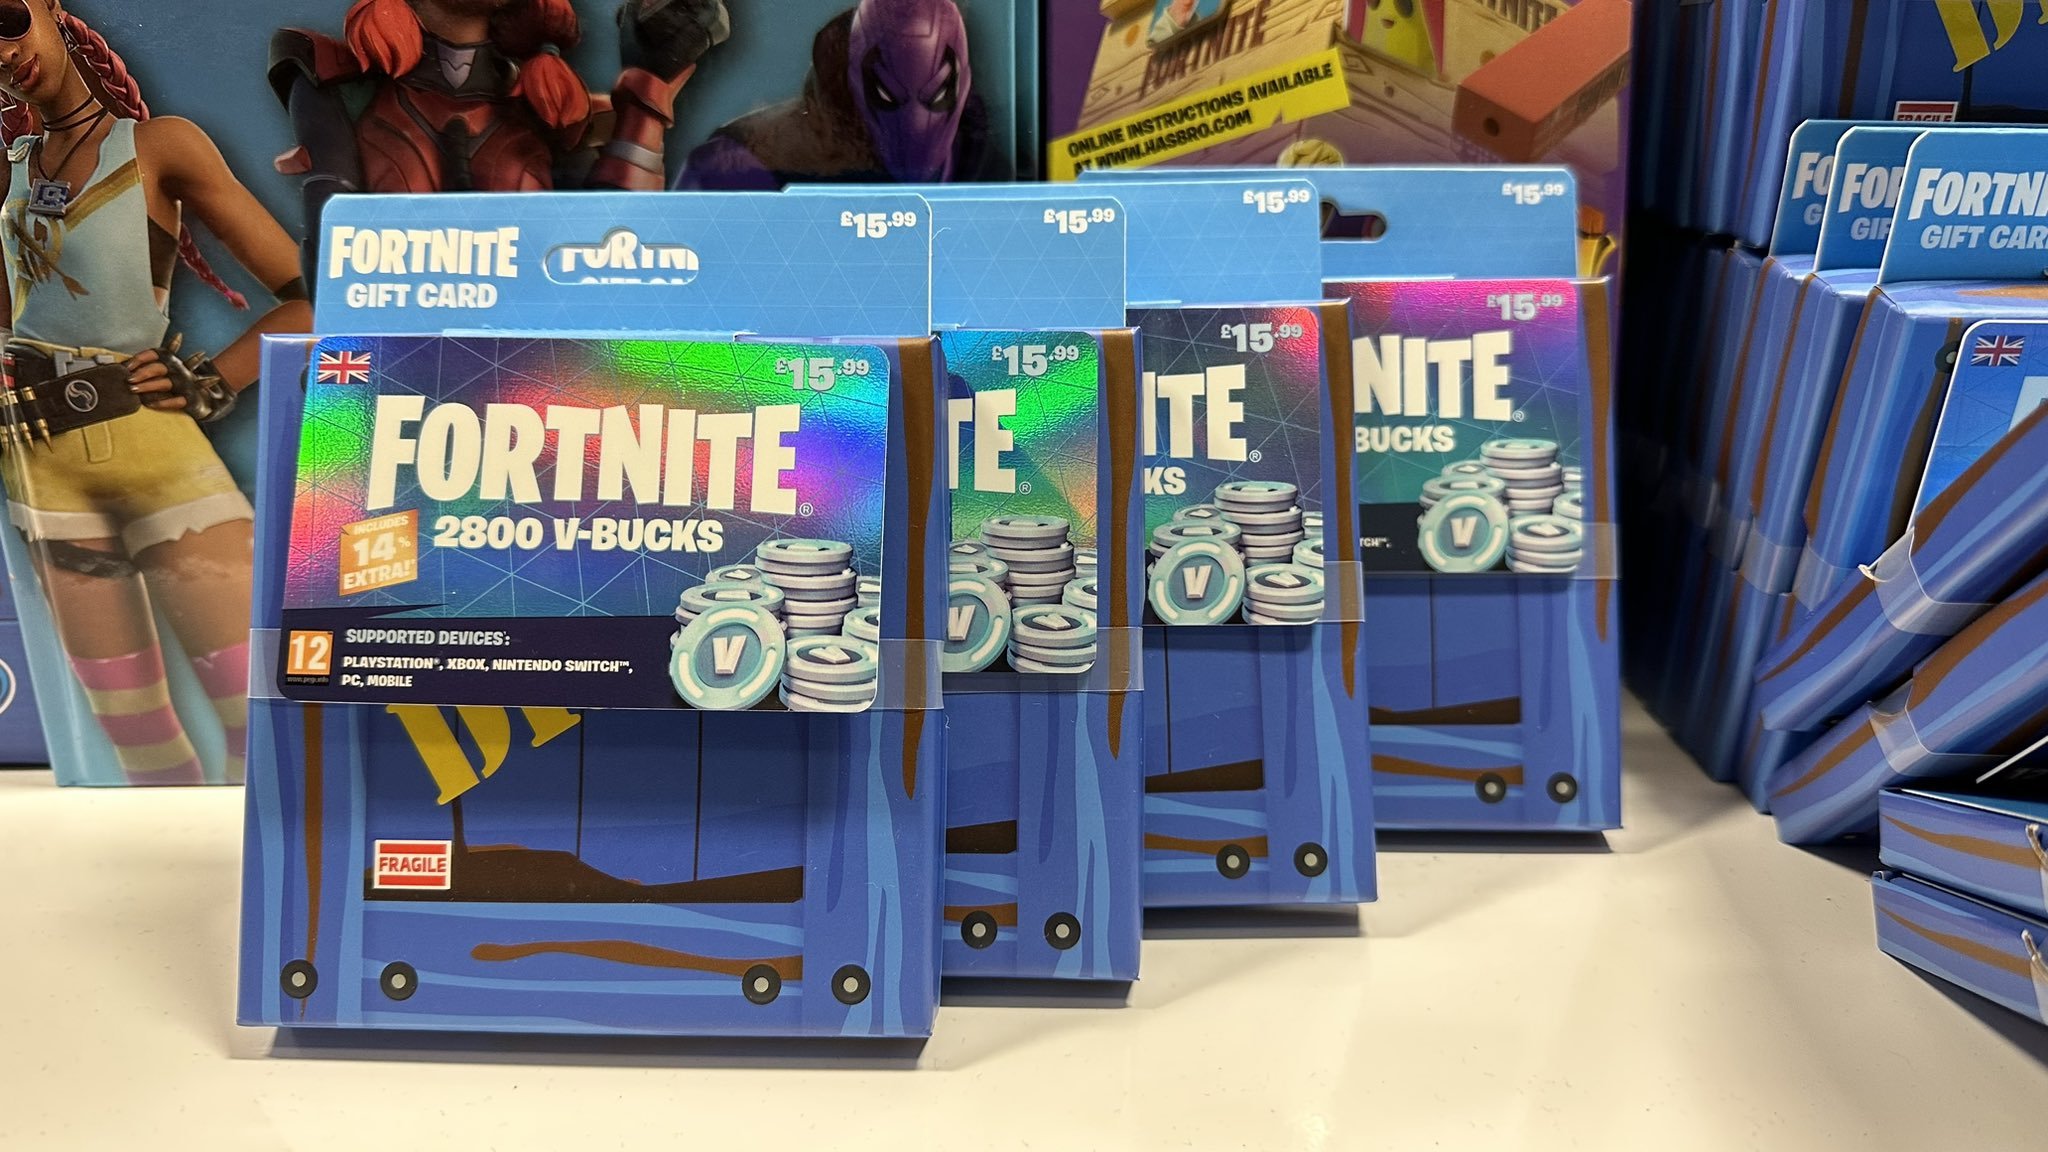 Fortnite News on X: A new design for V-Bucks Gift Cards has been spotted  in stores! #Fortnite (📸 @FBRFeed)  / X